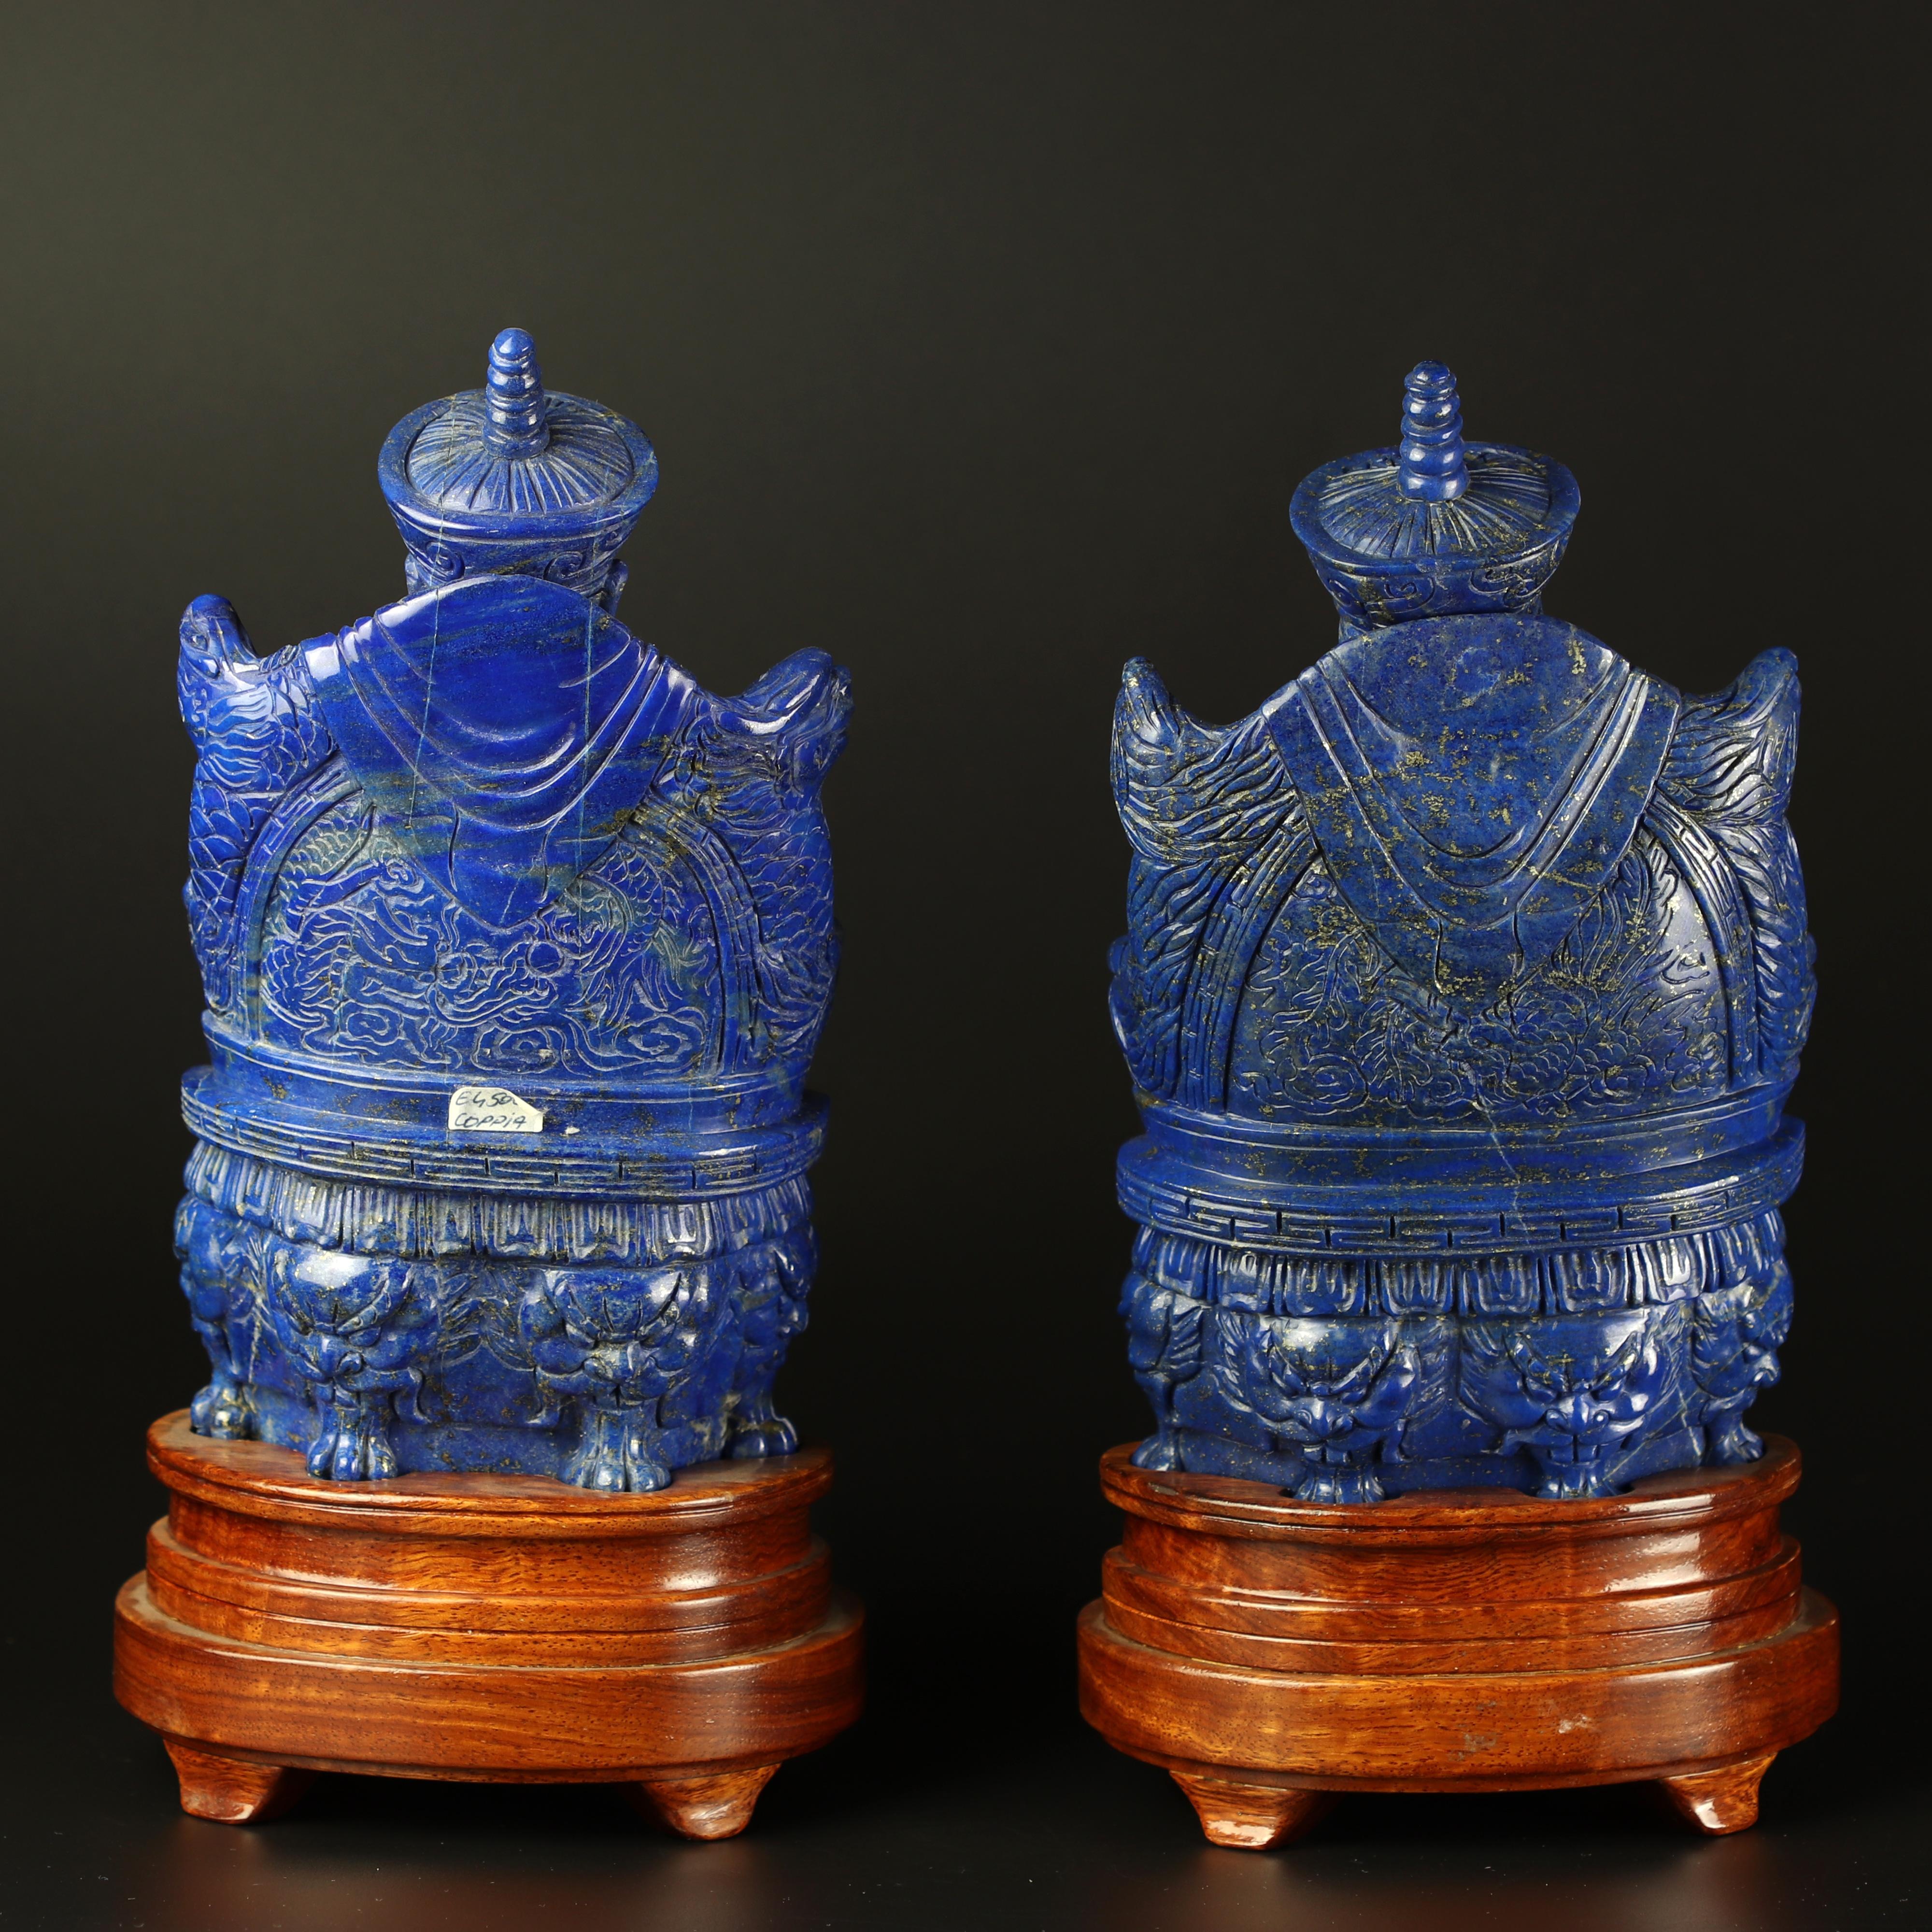 Lapis Lazuli King Queen Carved Blue Gemstone Artisanal Royalty Statue Sculpture In Excellent Condition For Sale In Milano, IT